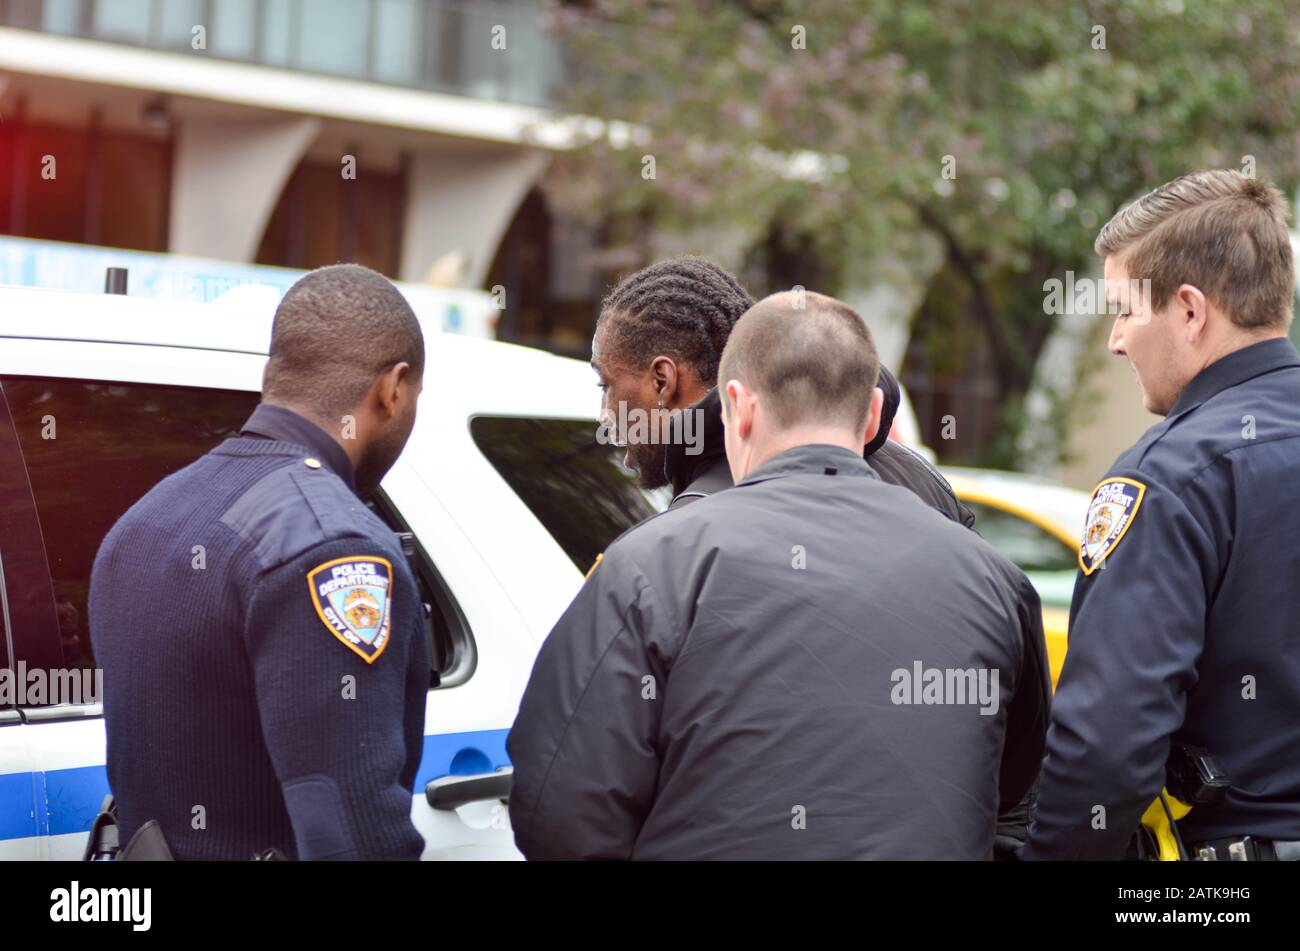 NYPD officers are seen arresting a bike messenger for unknown reasons at the 7th Avenue and 59th street (Central Park) in New York City on Oct 8,2018. Stock Photo